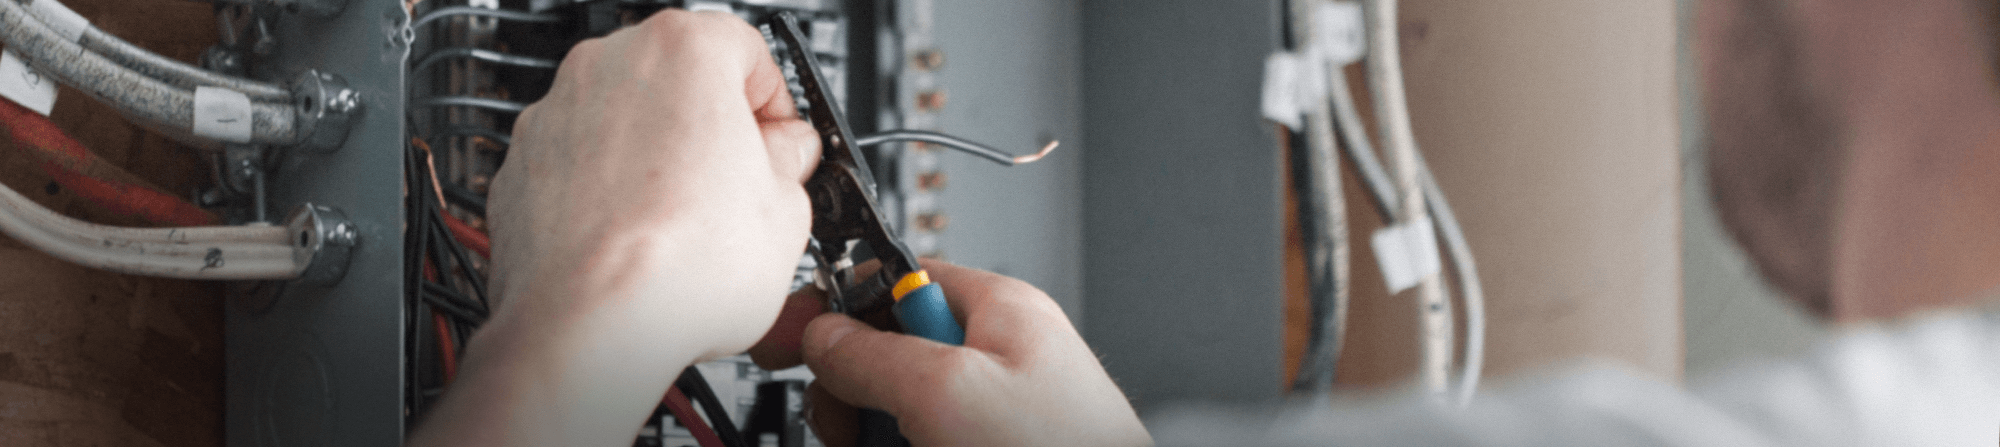 Electrical panel repair & replacement service Wisconsin